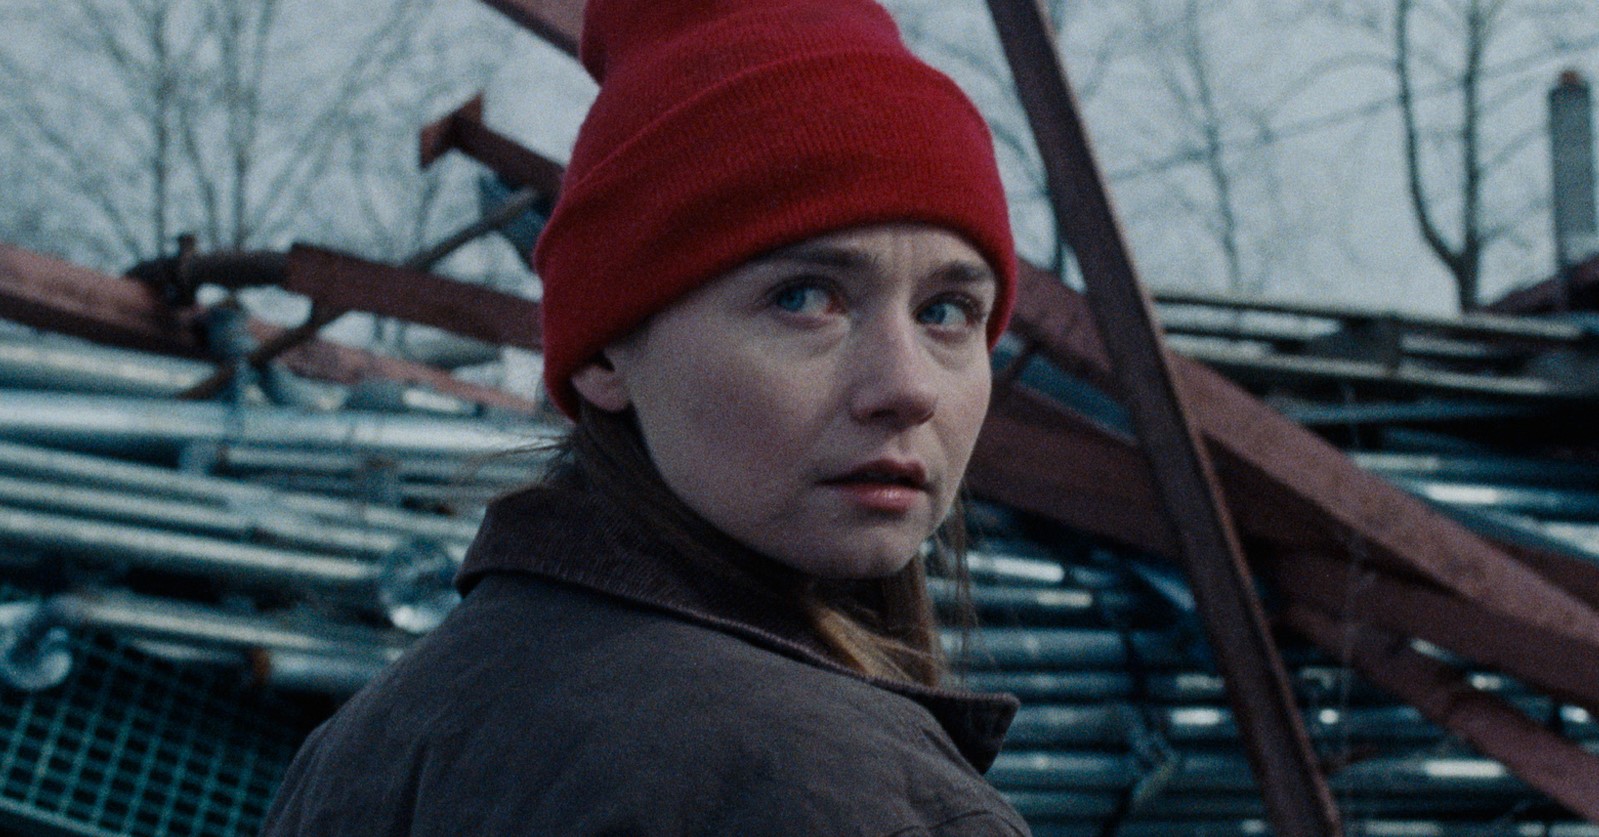 Holler Starring Jessica Barden and directed by Nicole Riegel